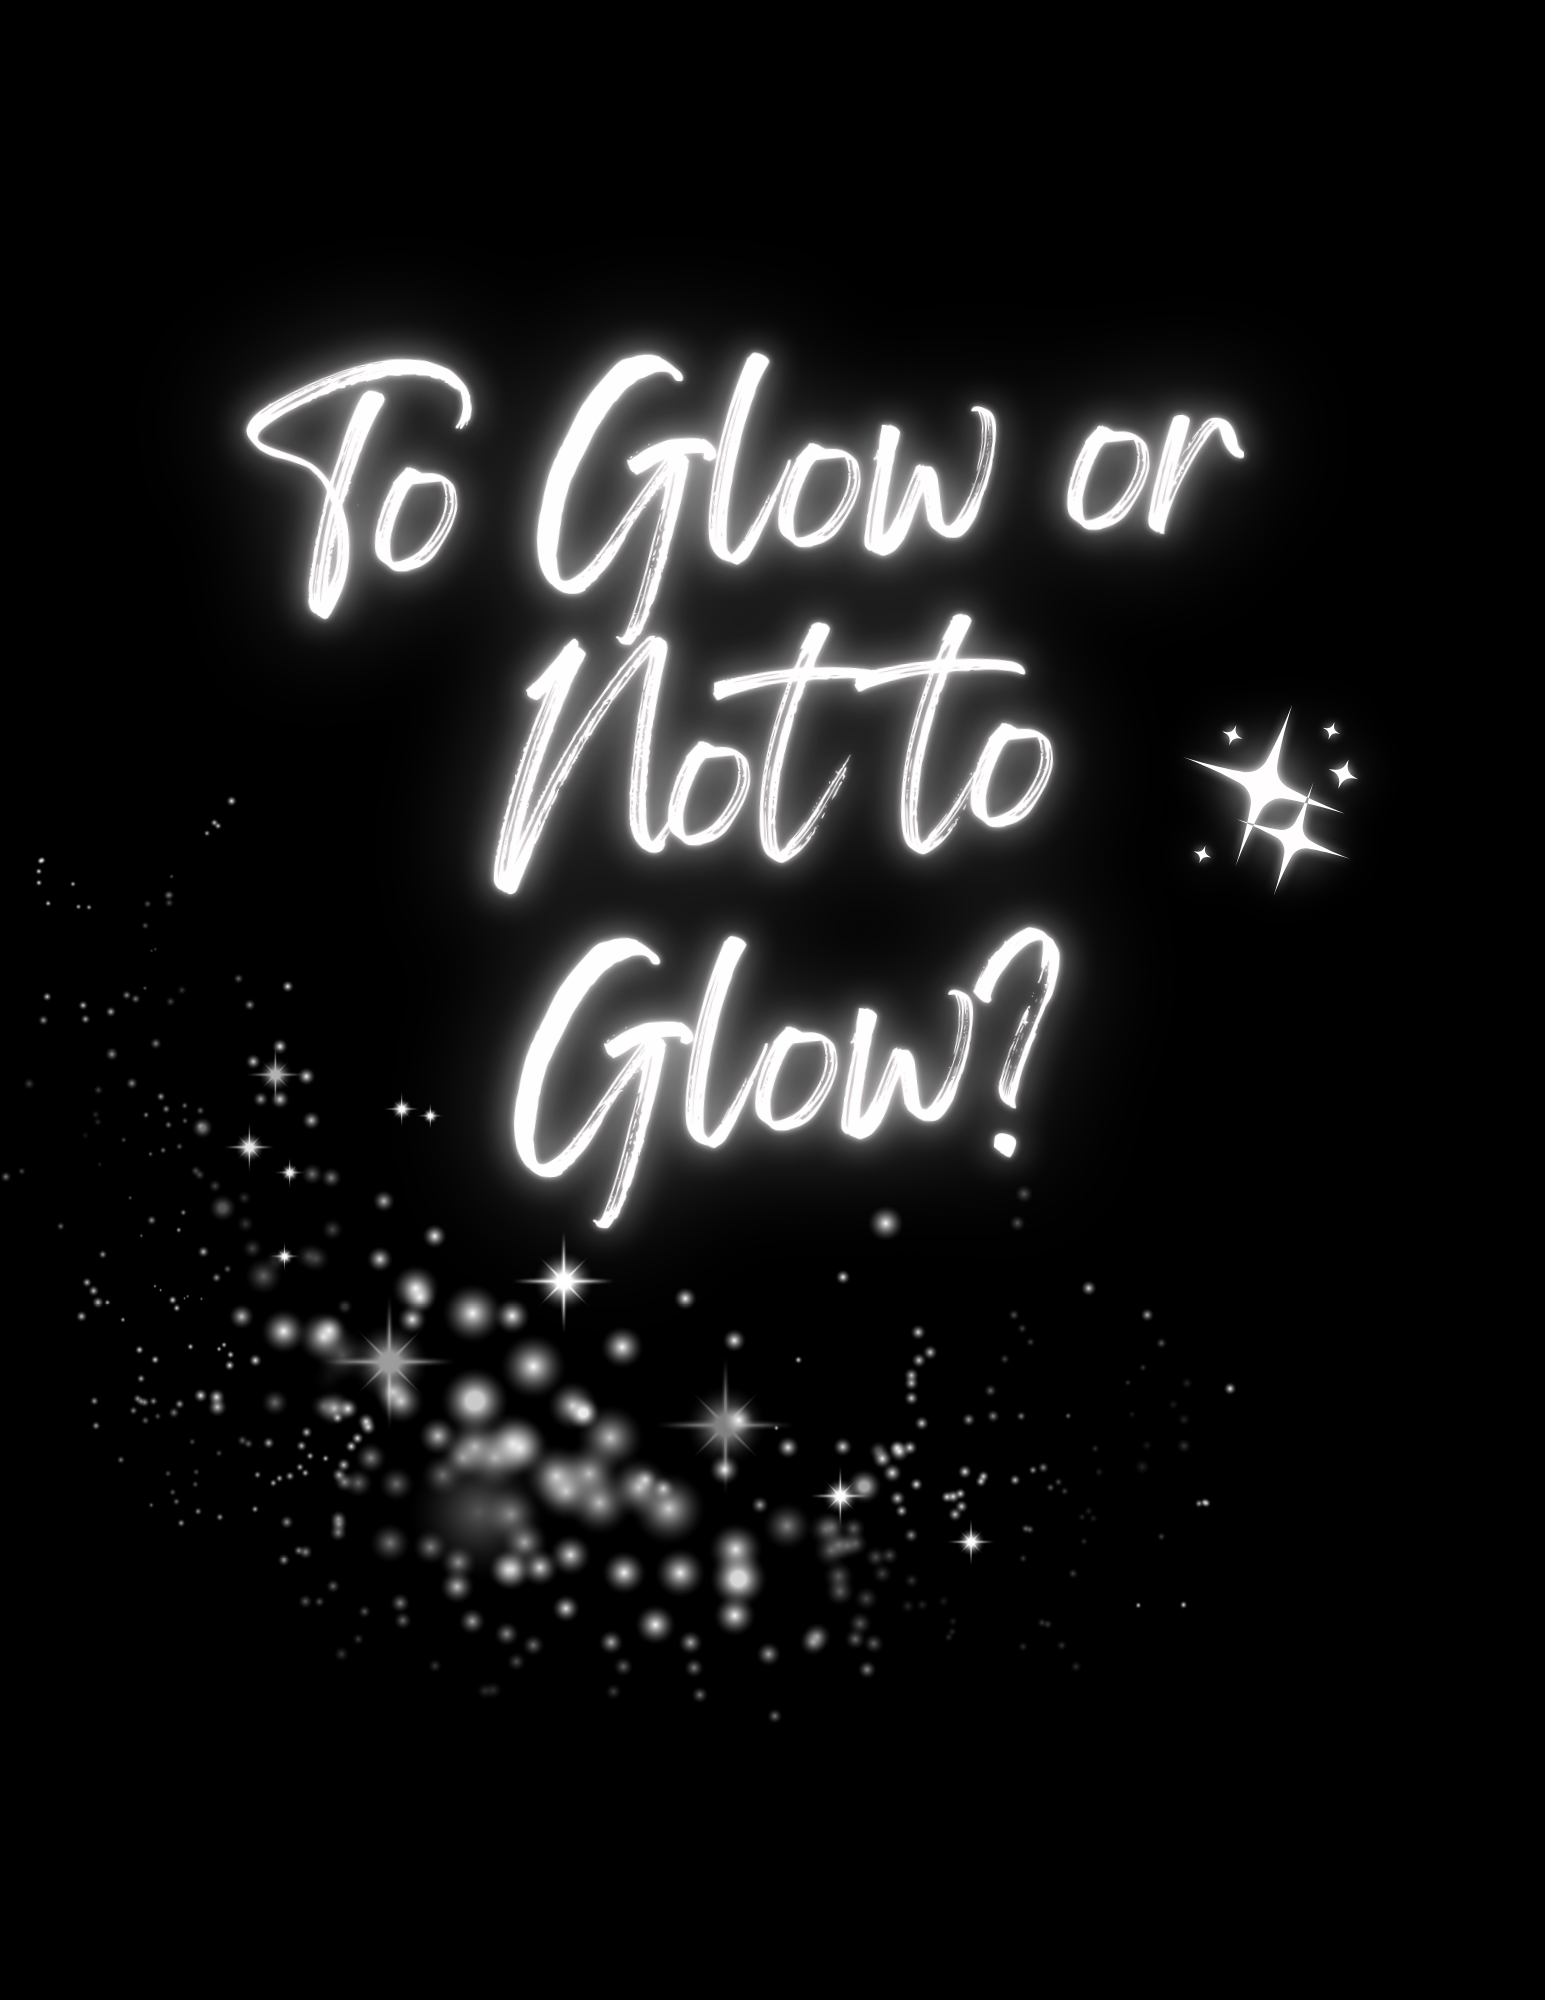 To Glow or Not to Glow?